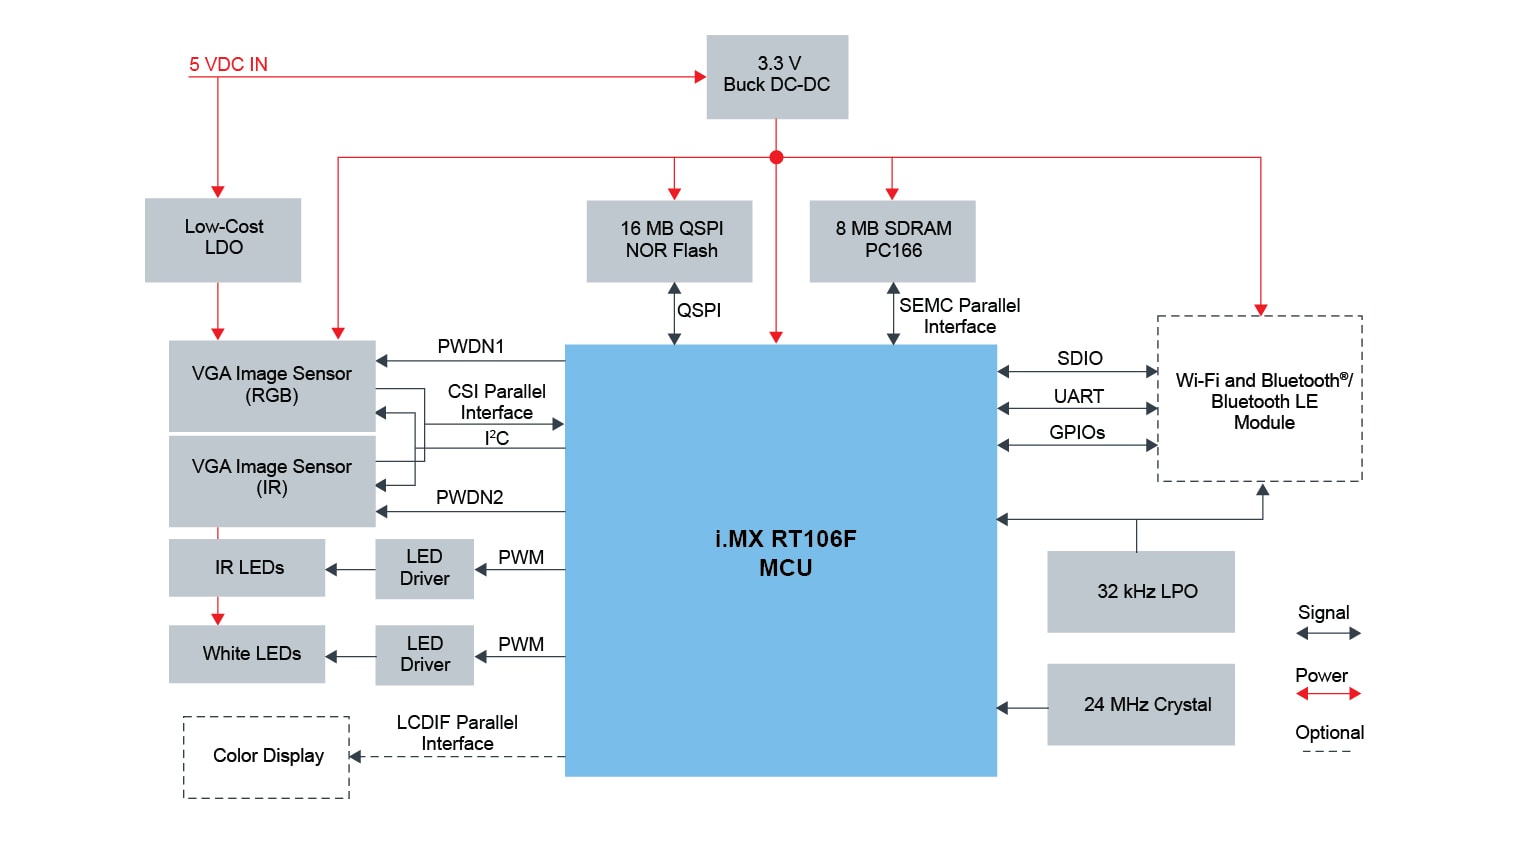 i.MX RT106F Anti-Spoofing Face Recognition Hardware Block Diagram